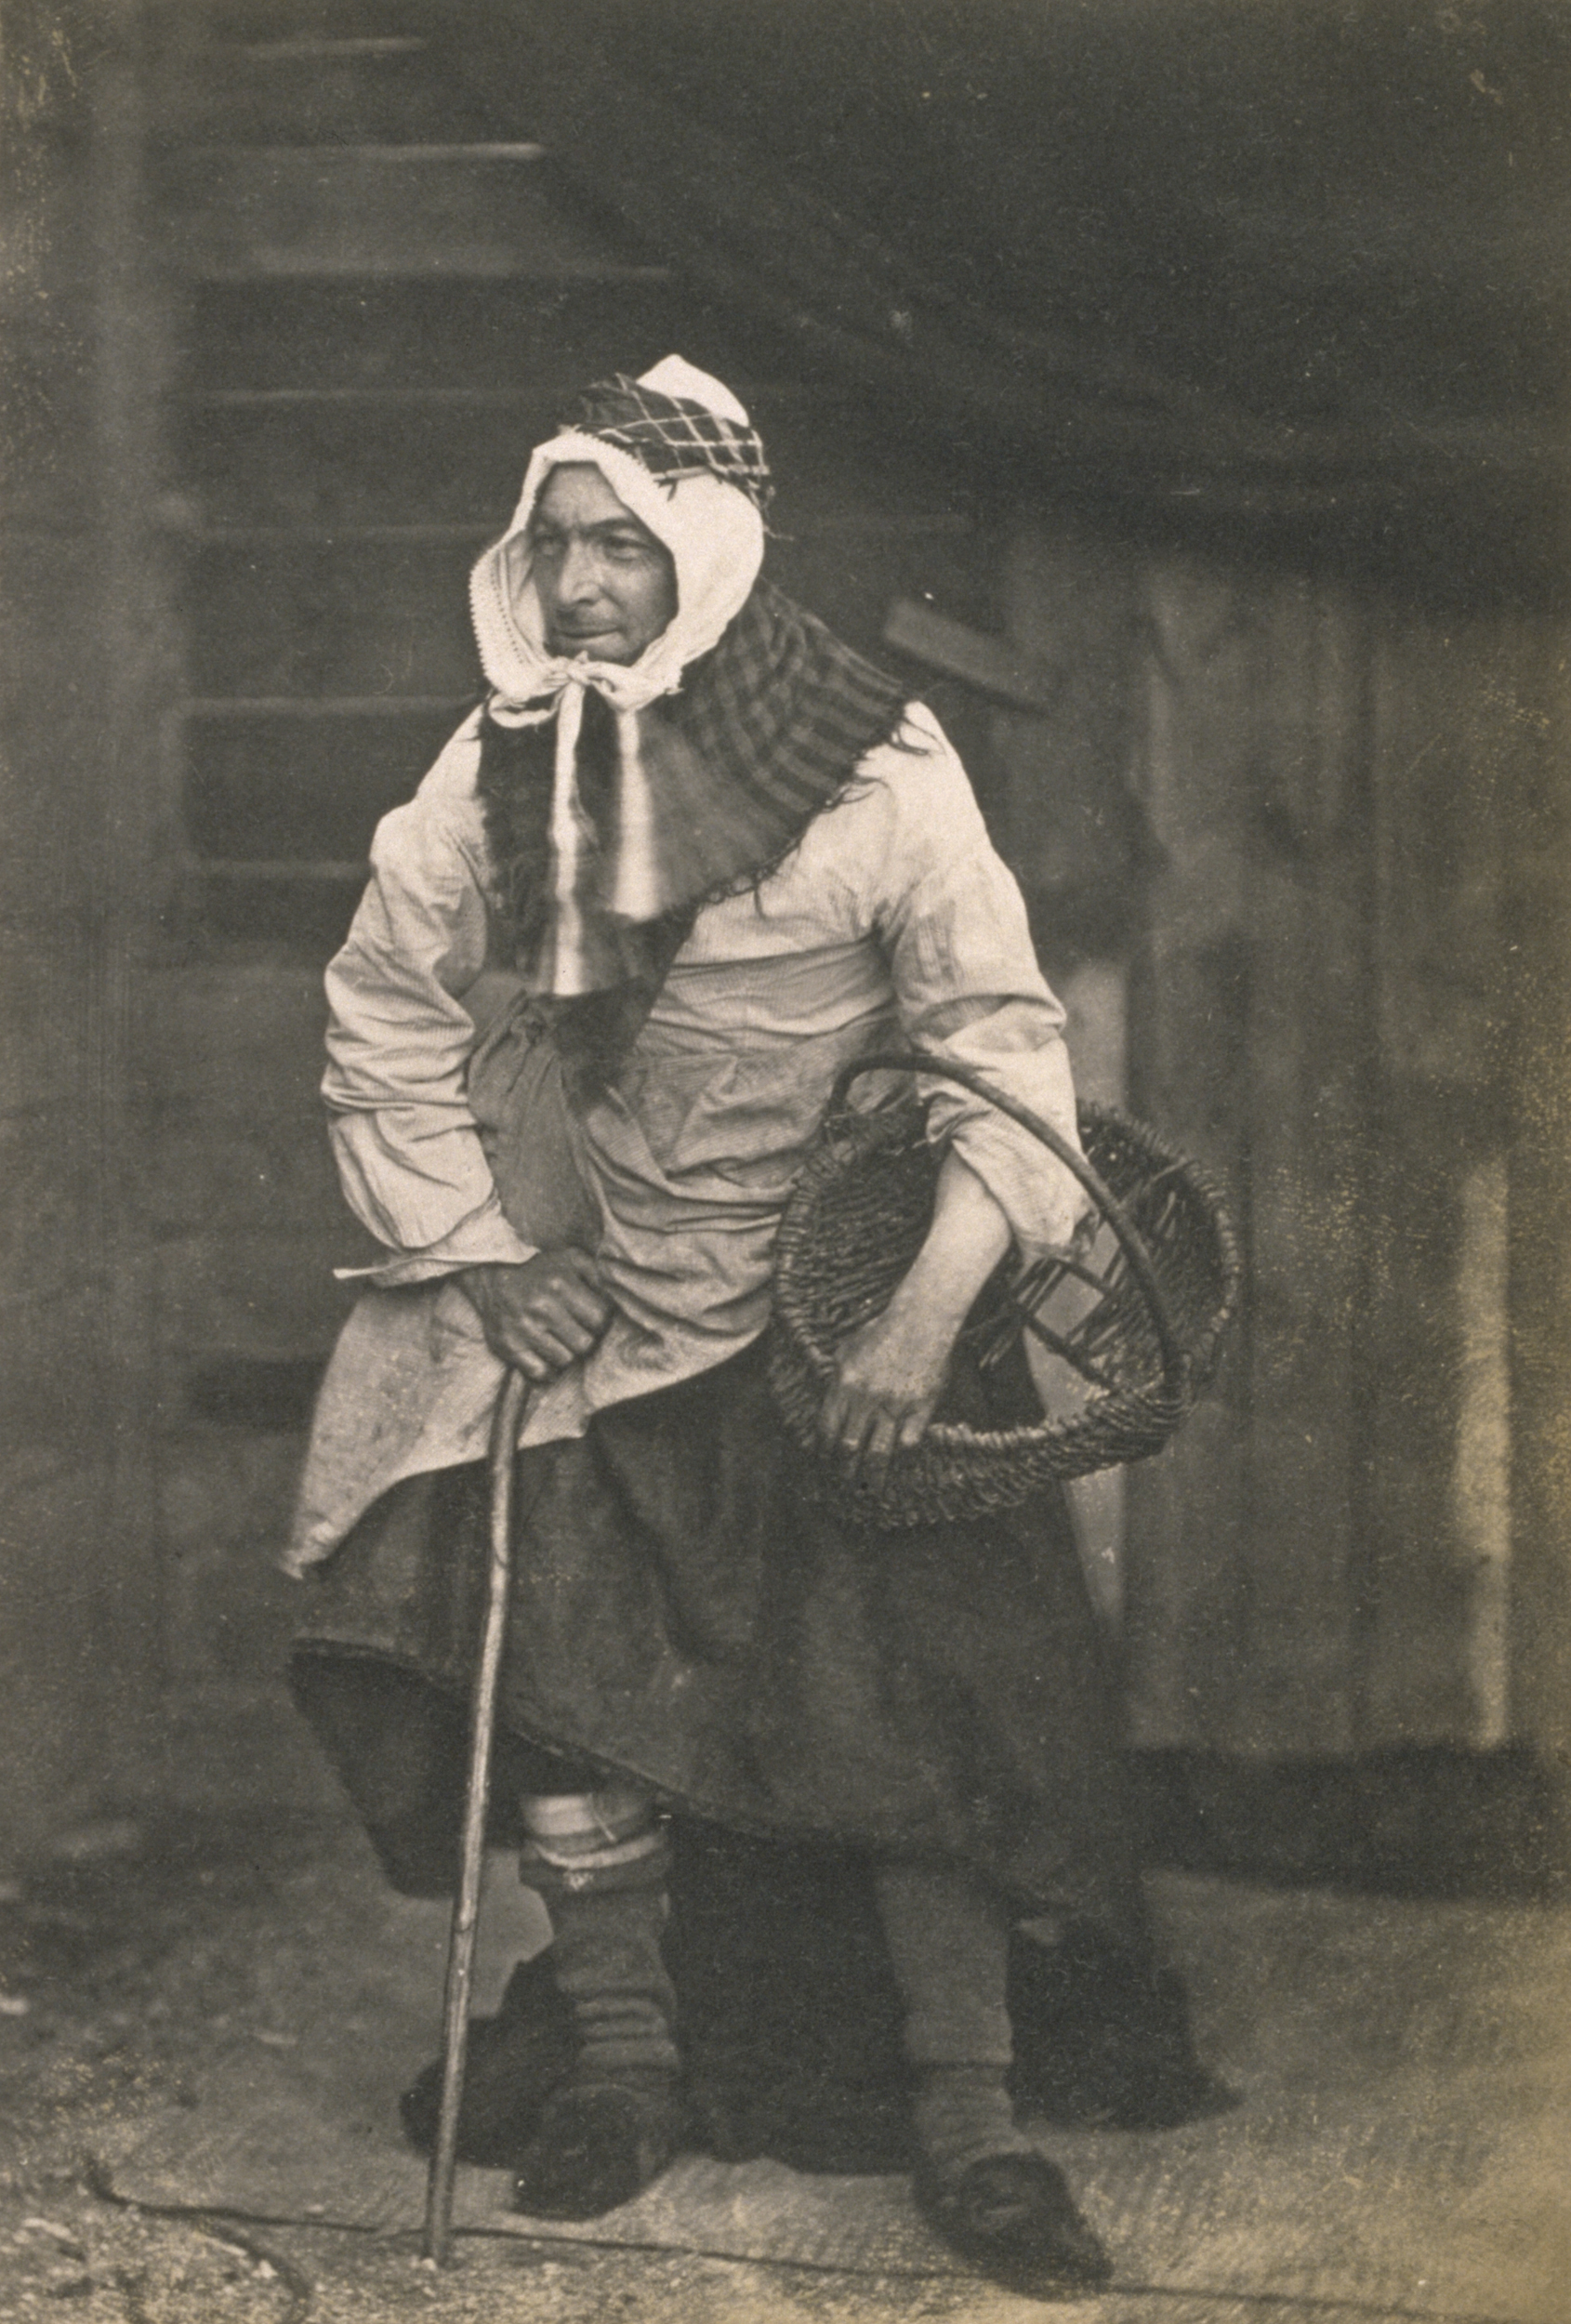 “Mr T. Rodger as Fishwoman” (father of the photographer), by Thomas Rodger, 1860. (St Andrews ALB-6-99-2)